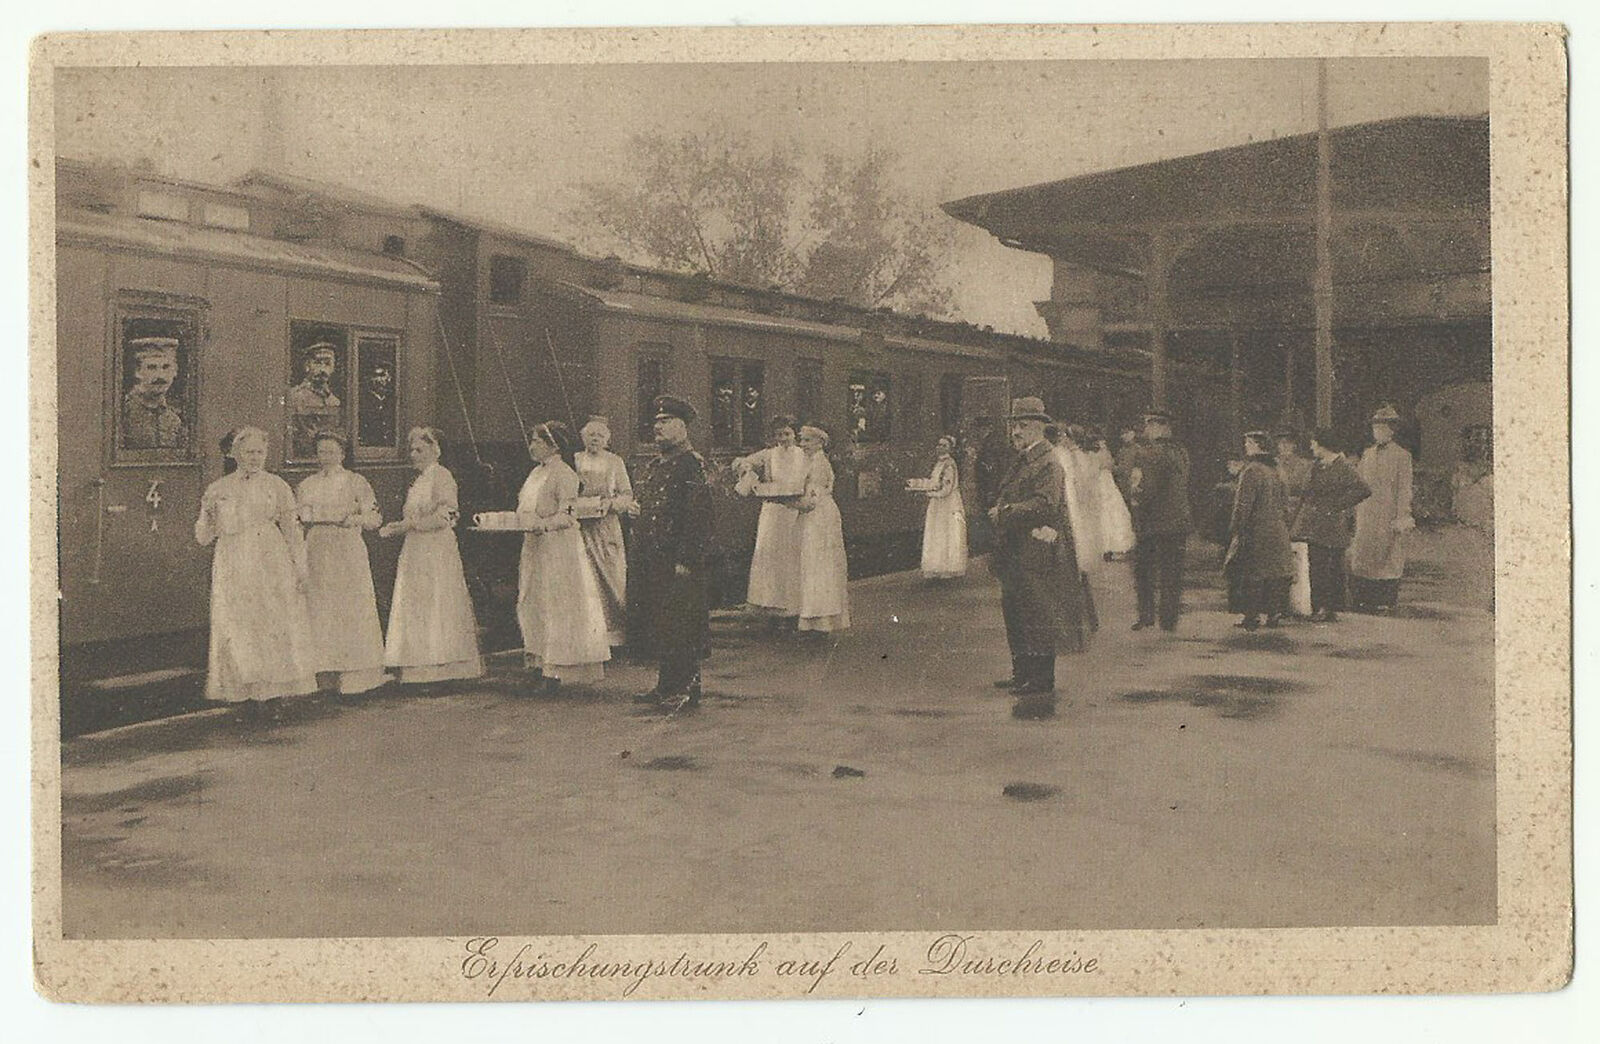 Refreshment for Soldiers, WWI Welfare Postcard, Train Station, 1917